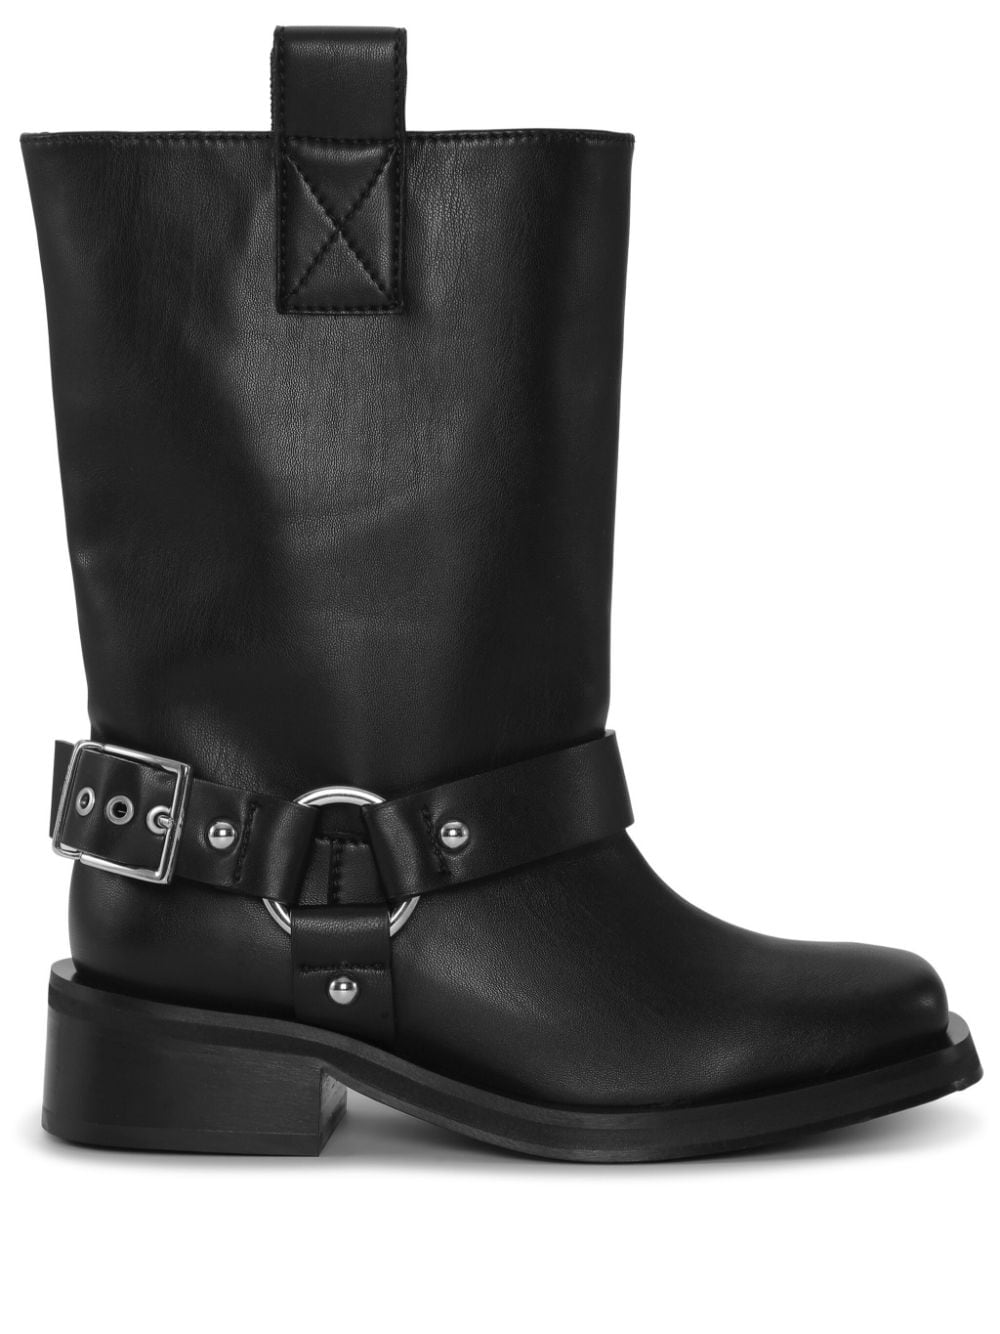 GANNI RECYCLED LEATHER BIKER BOOTS